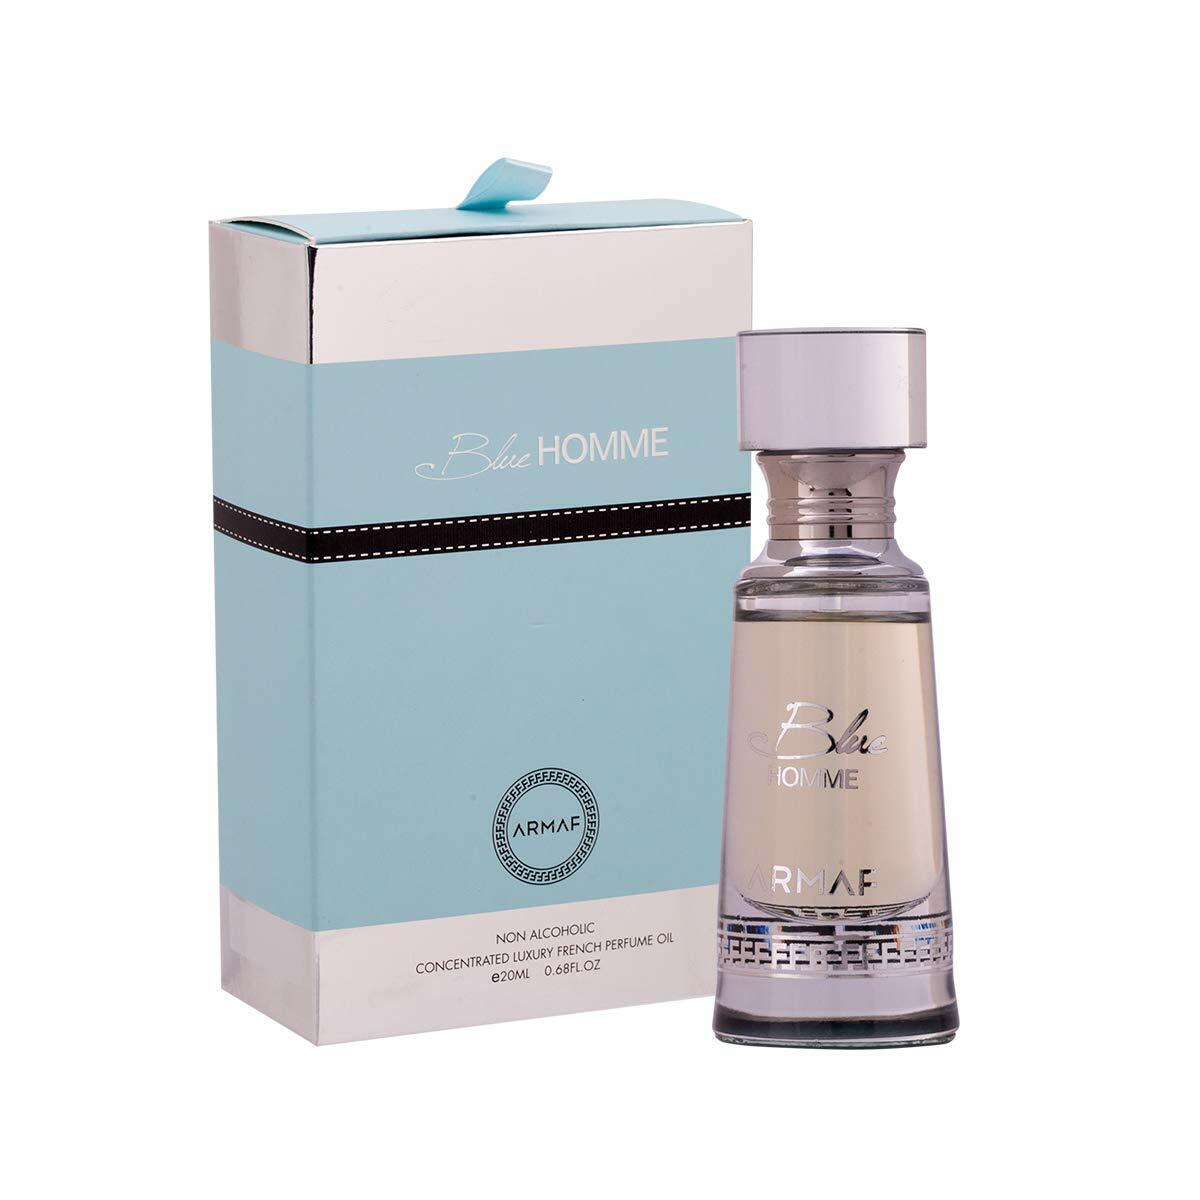 Fawah Perfumes Armaf Blue Homme Non-Alcoholic Perfume Oil 20ml.